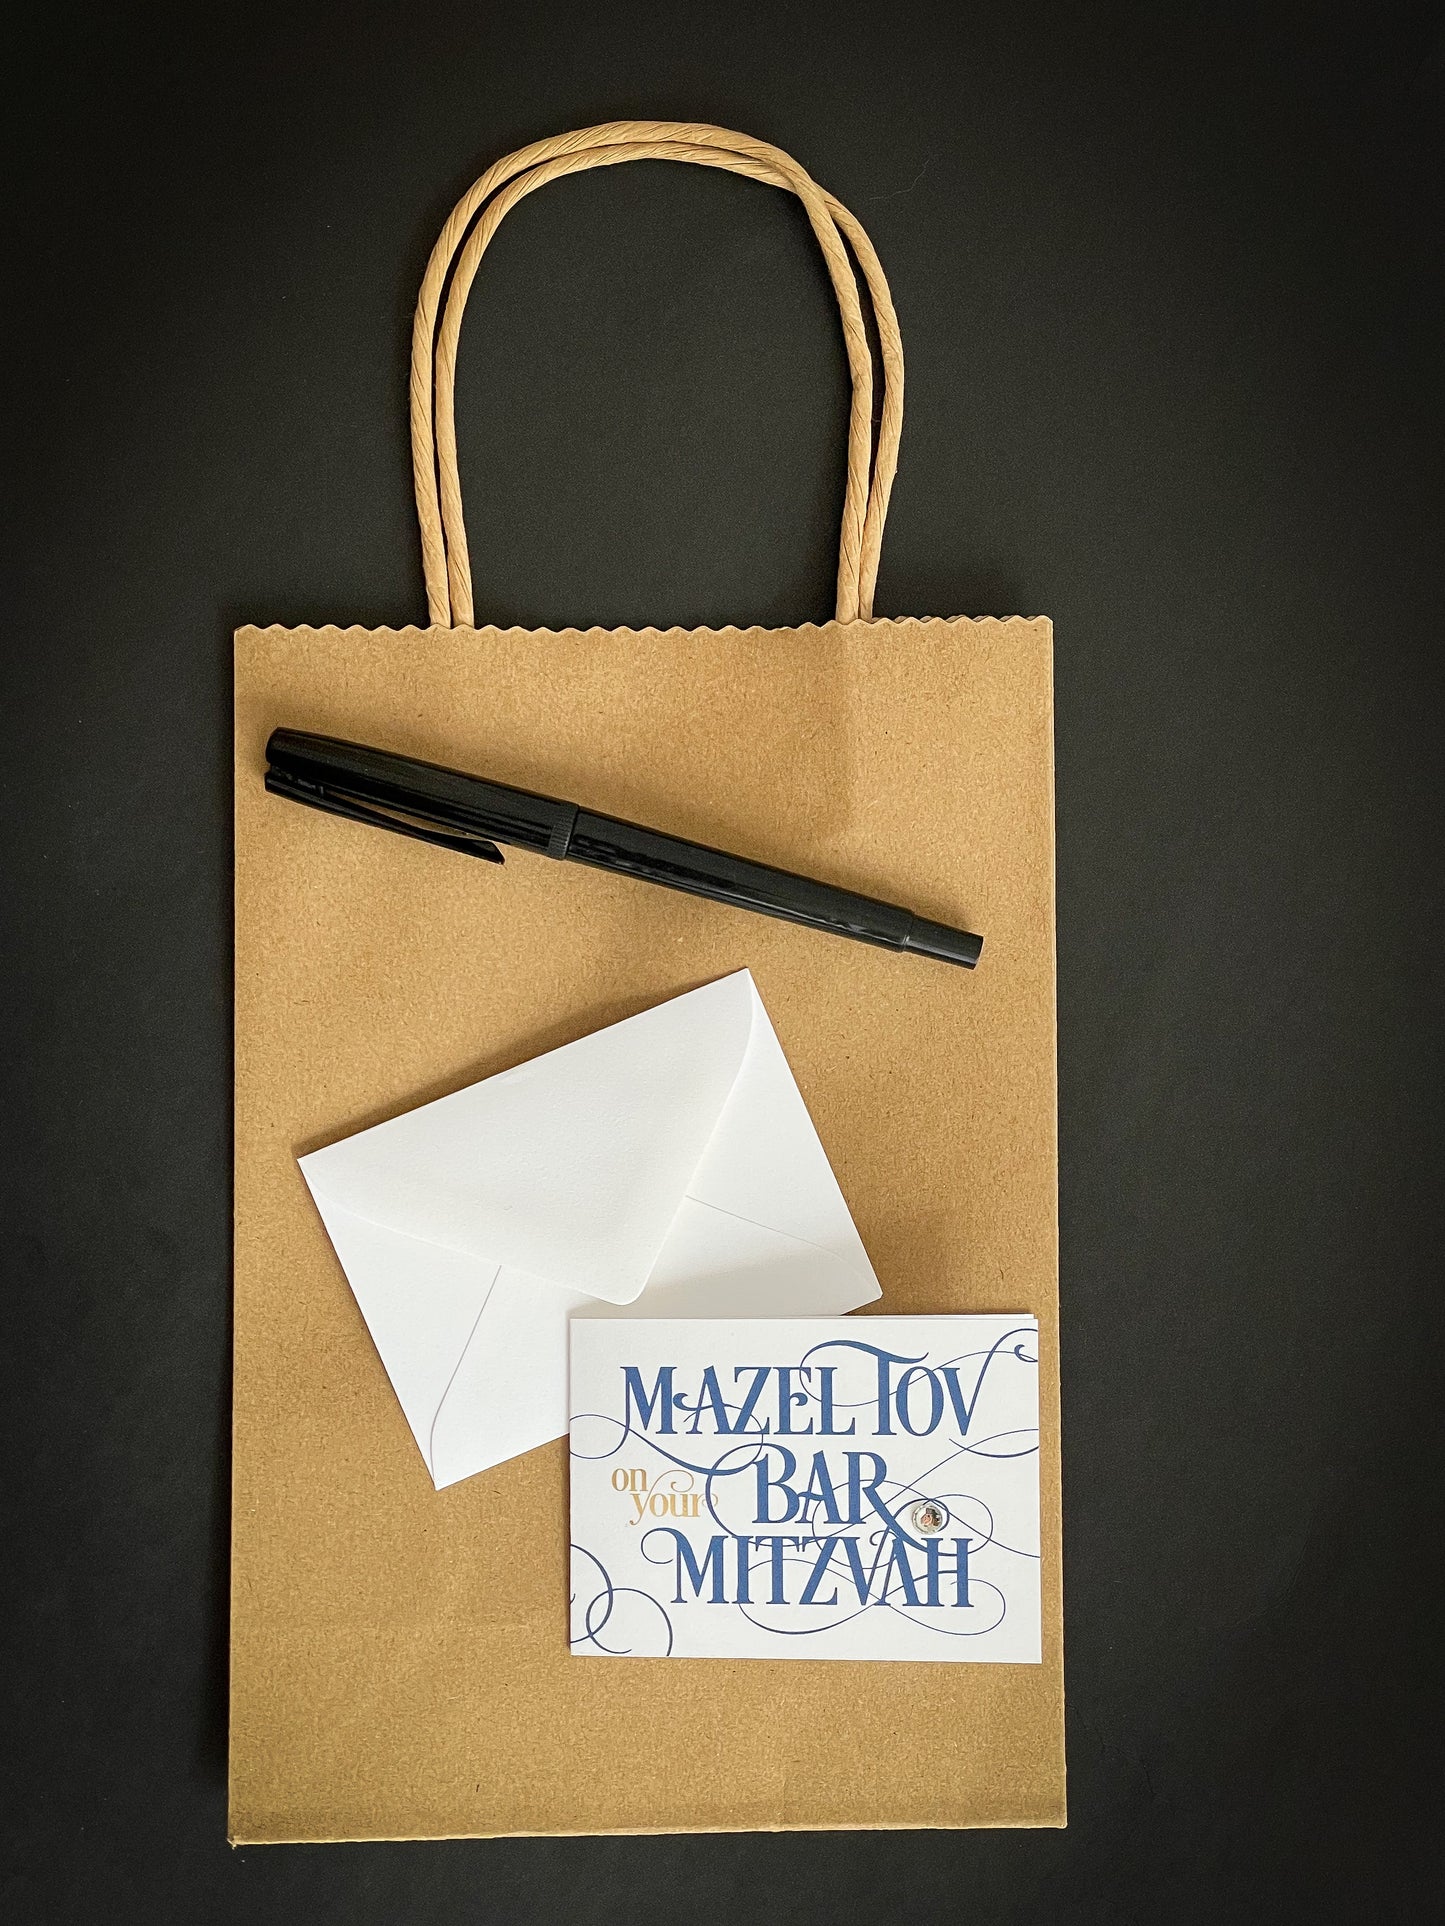 this is a mini note card on a craft paper gift bag with a white envelope and a black marker , the card says Mazel Tov on your bar mitzvah in blue